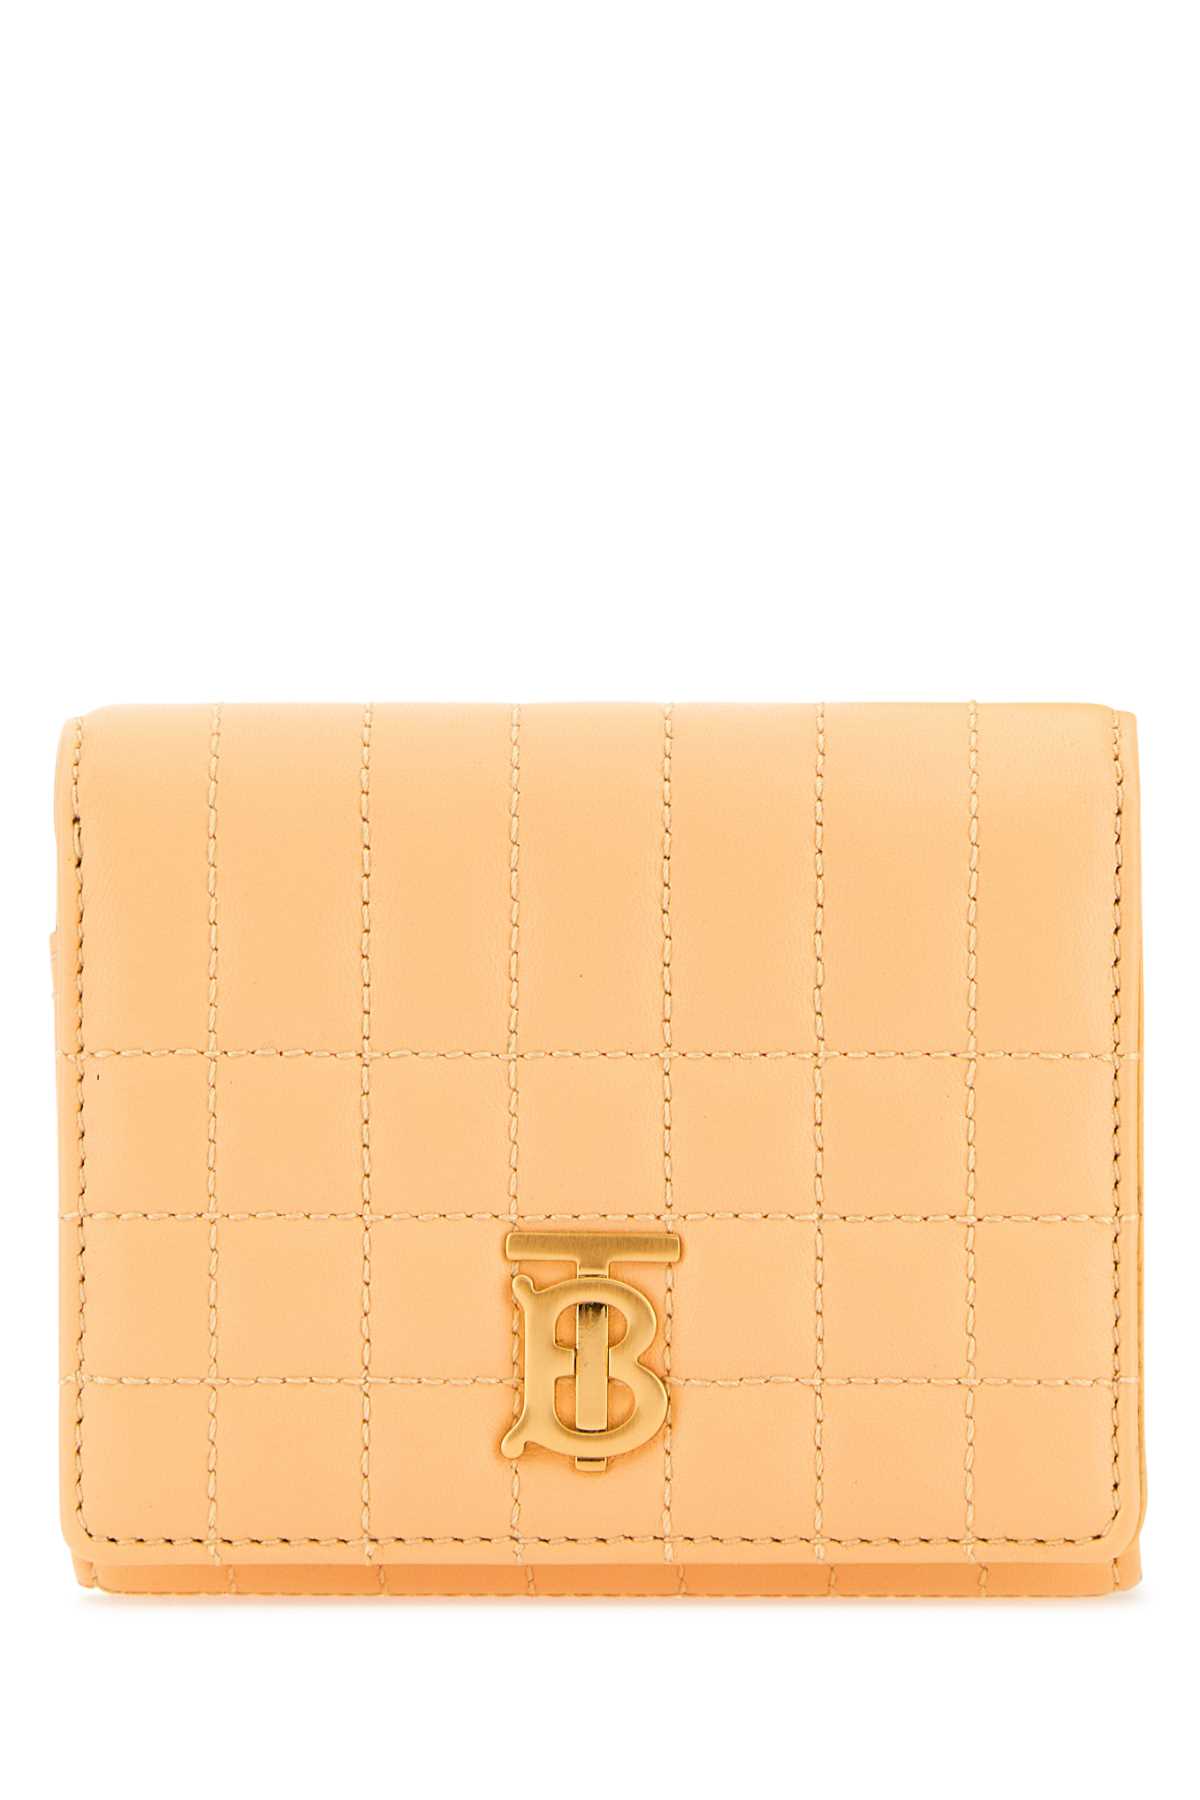 Burberry Peach Leather Small Lola Wallet